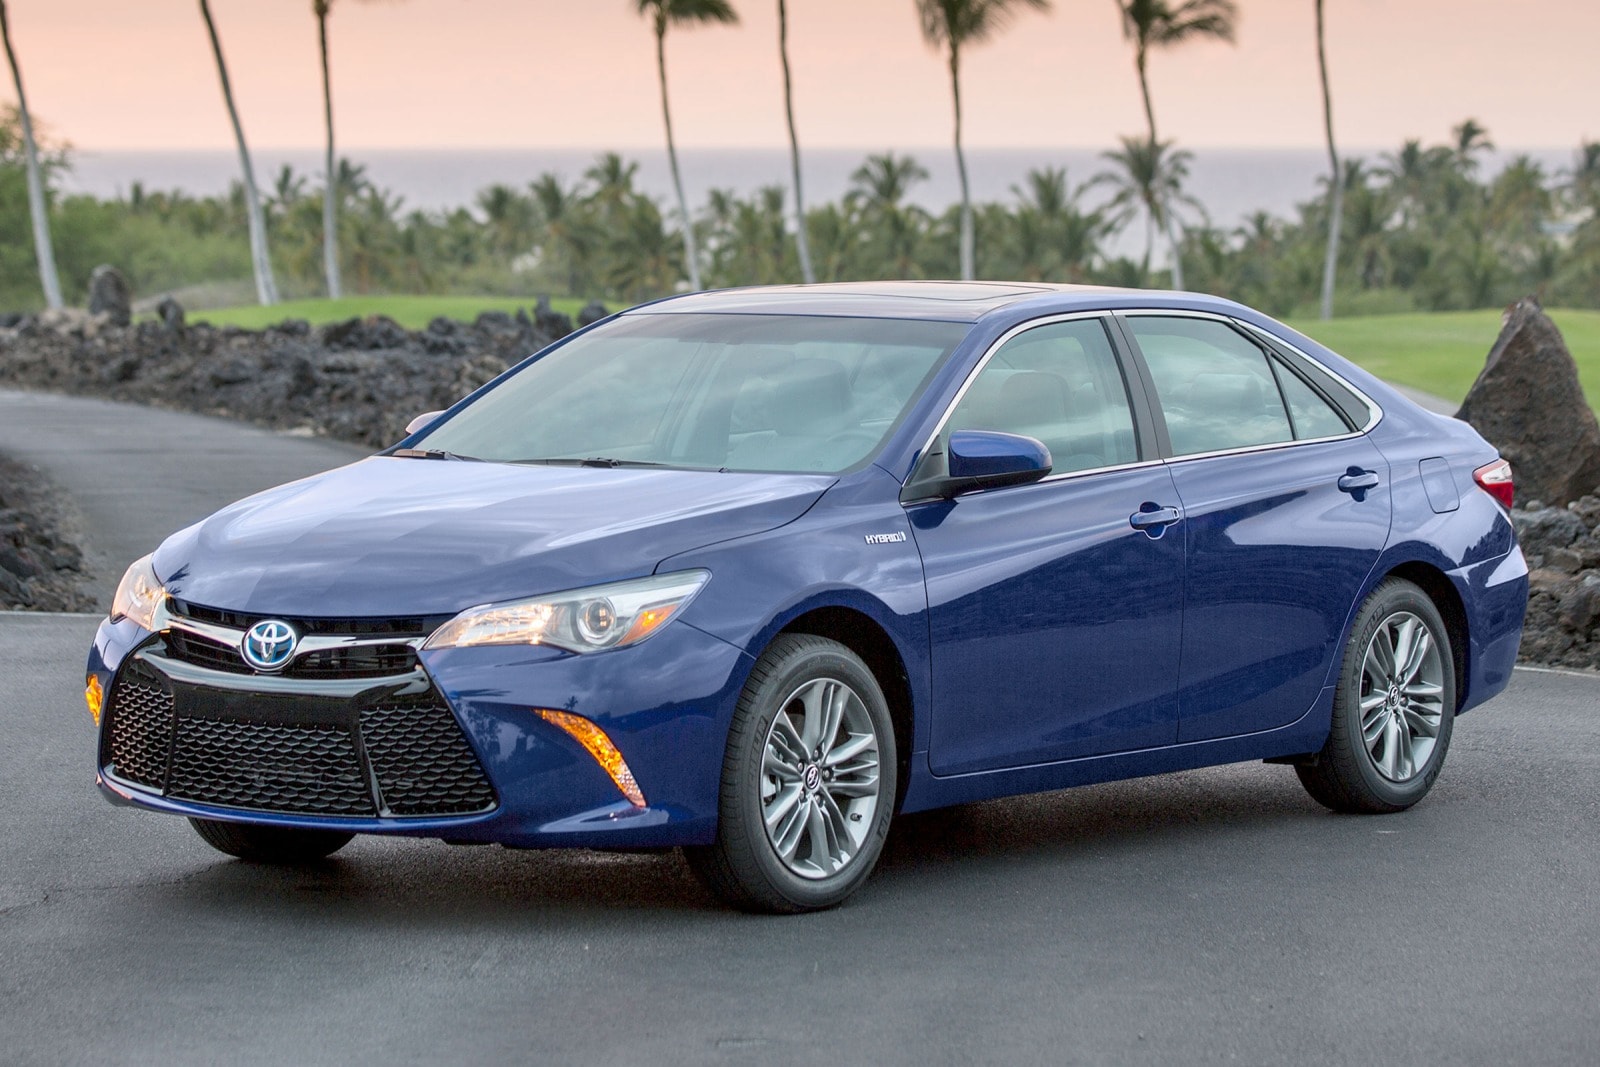 2017 Toyota Camry Hybrid Review & Ratings | Edmunds